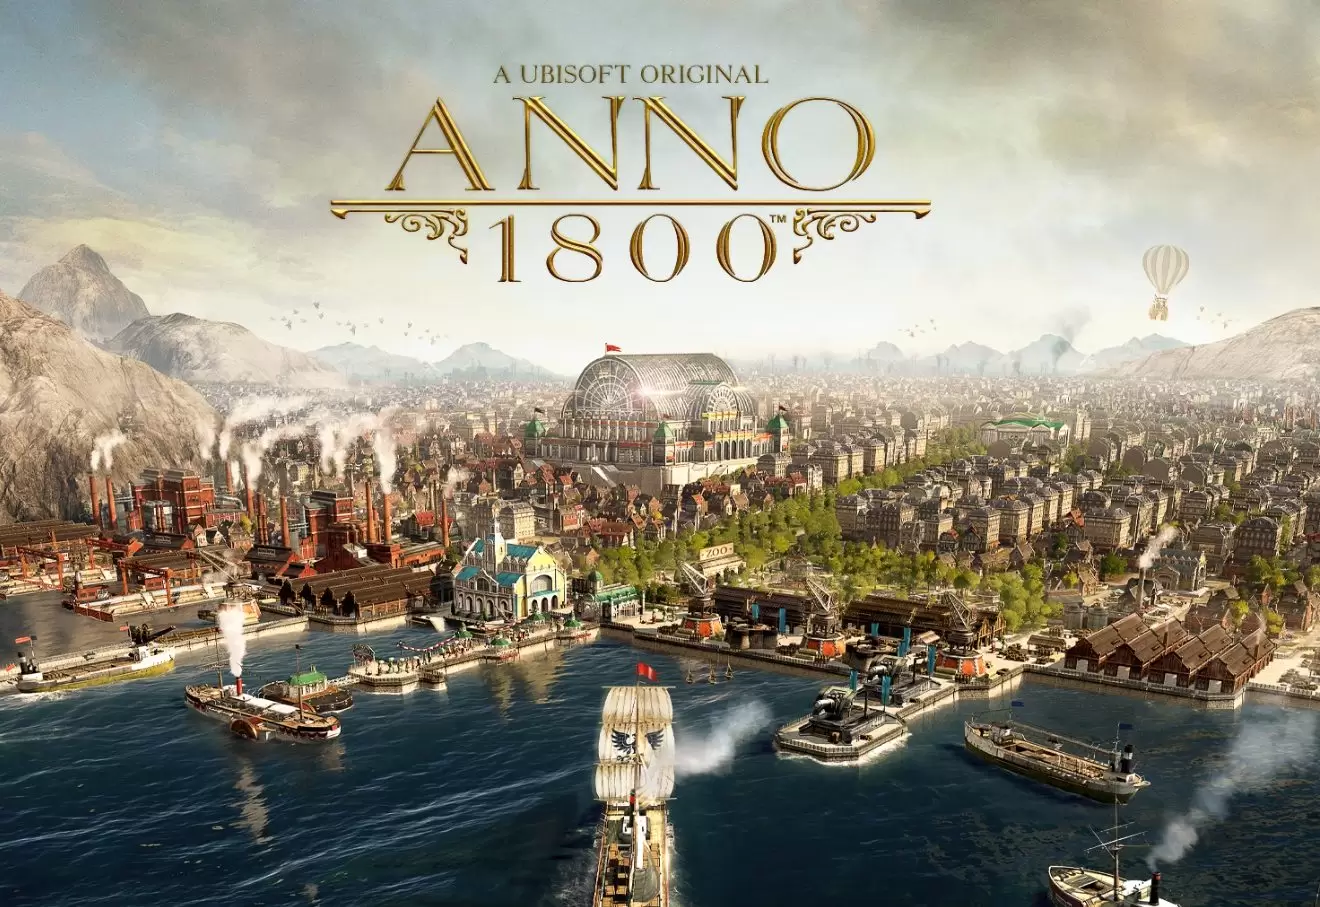 anno 1800 is free! How long is it valid?